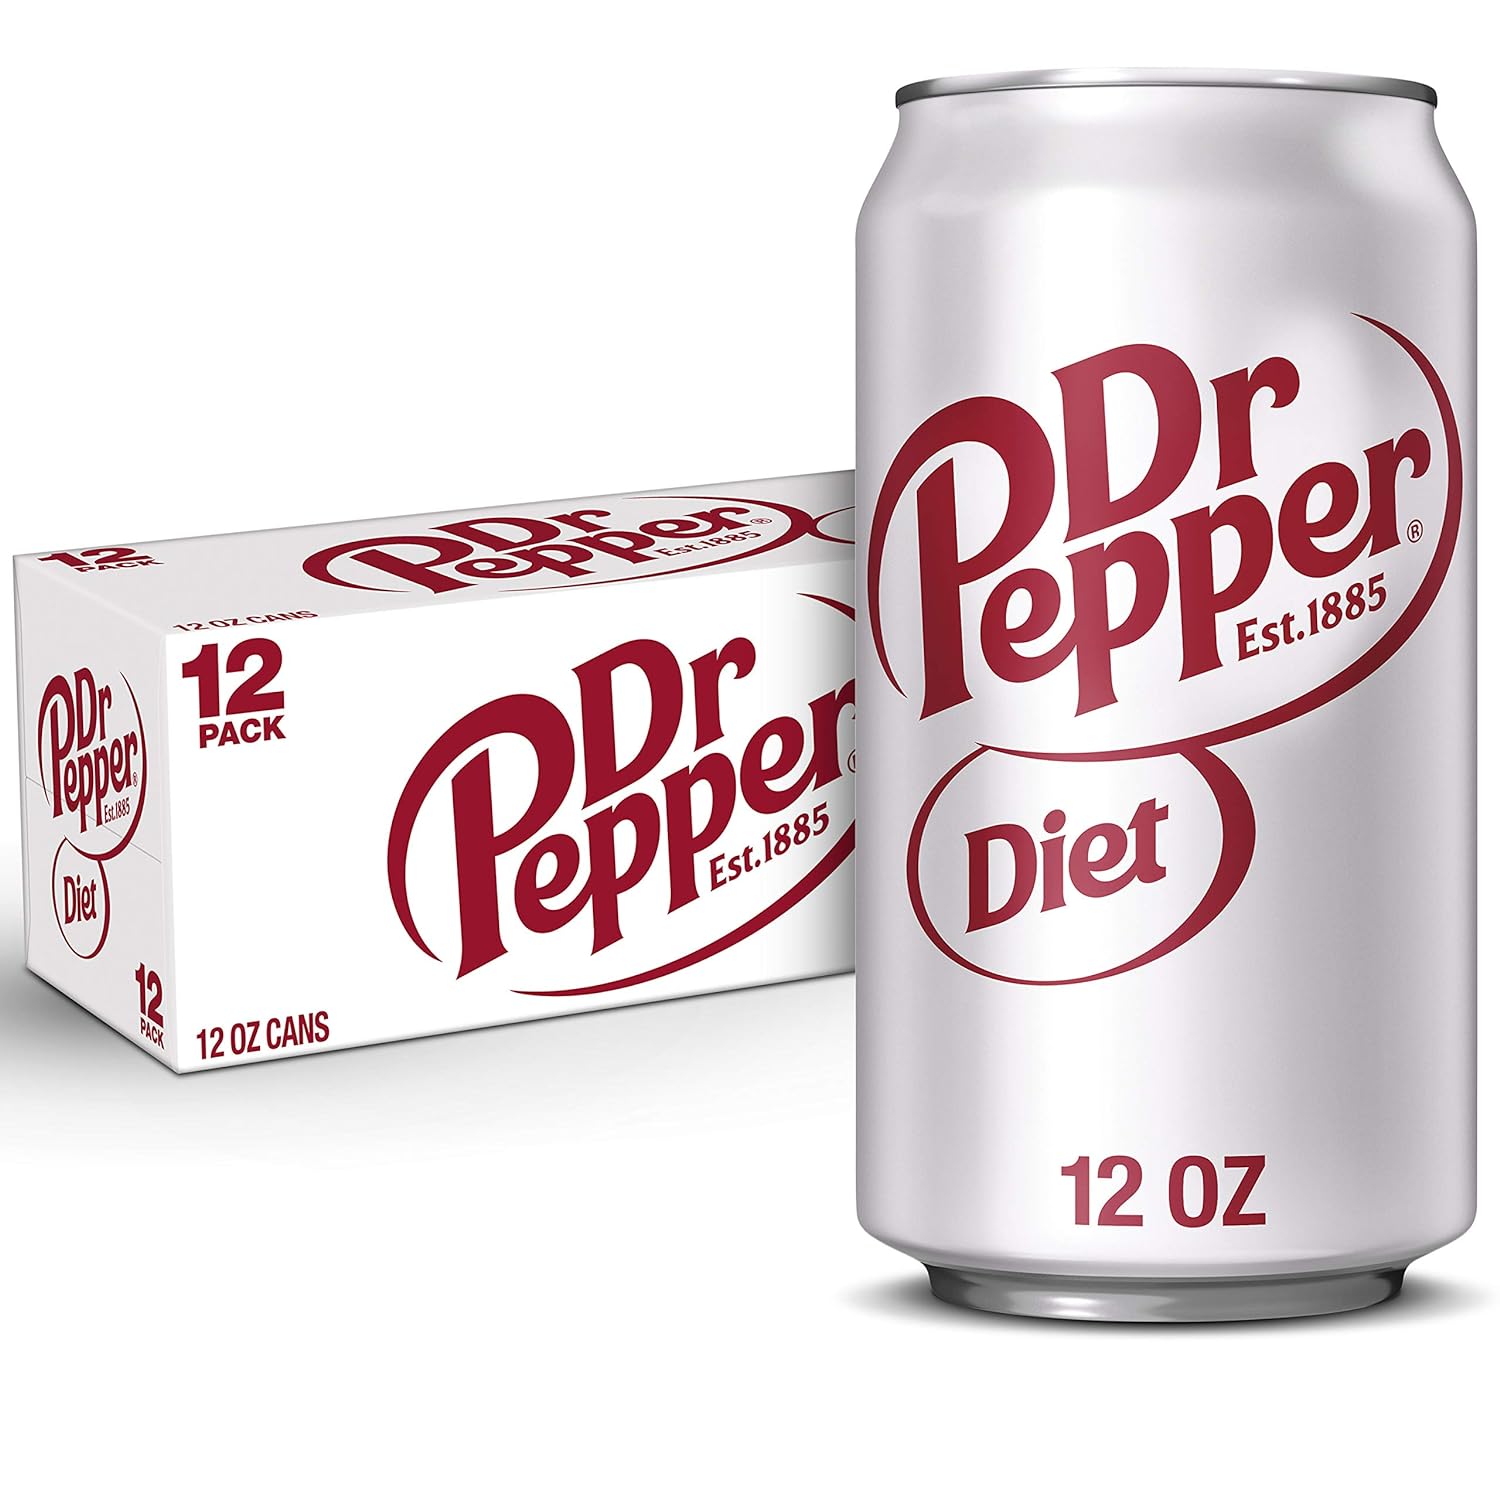 You Won’t Believe How Much Sugar Is In A Diet Dr. Pepper!